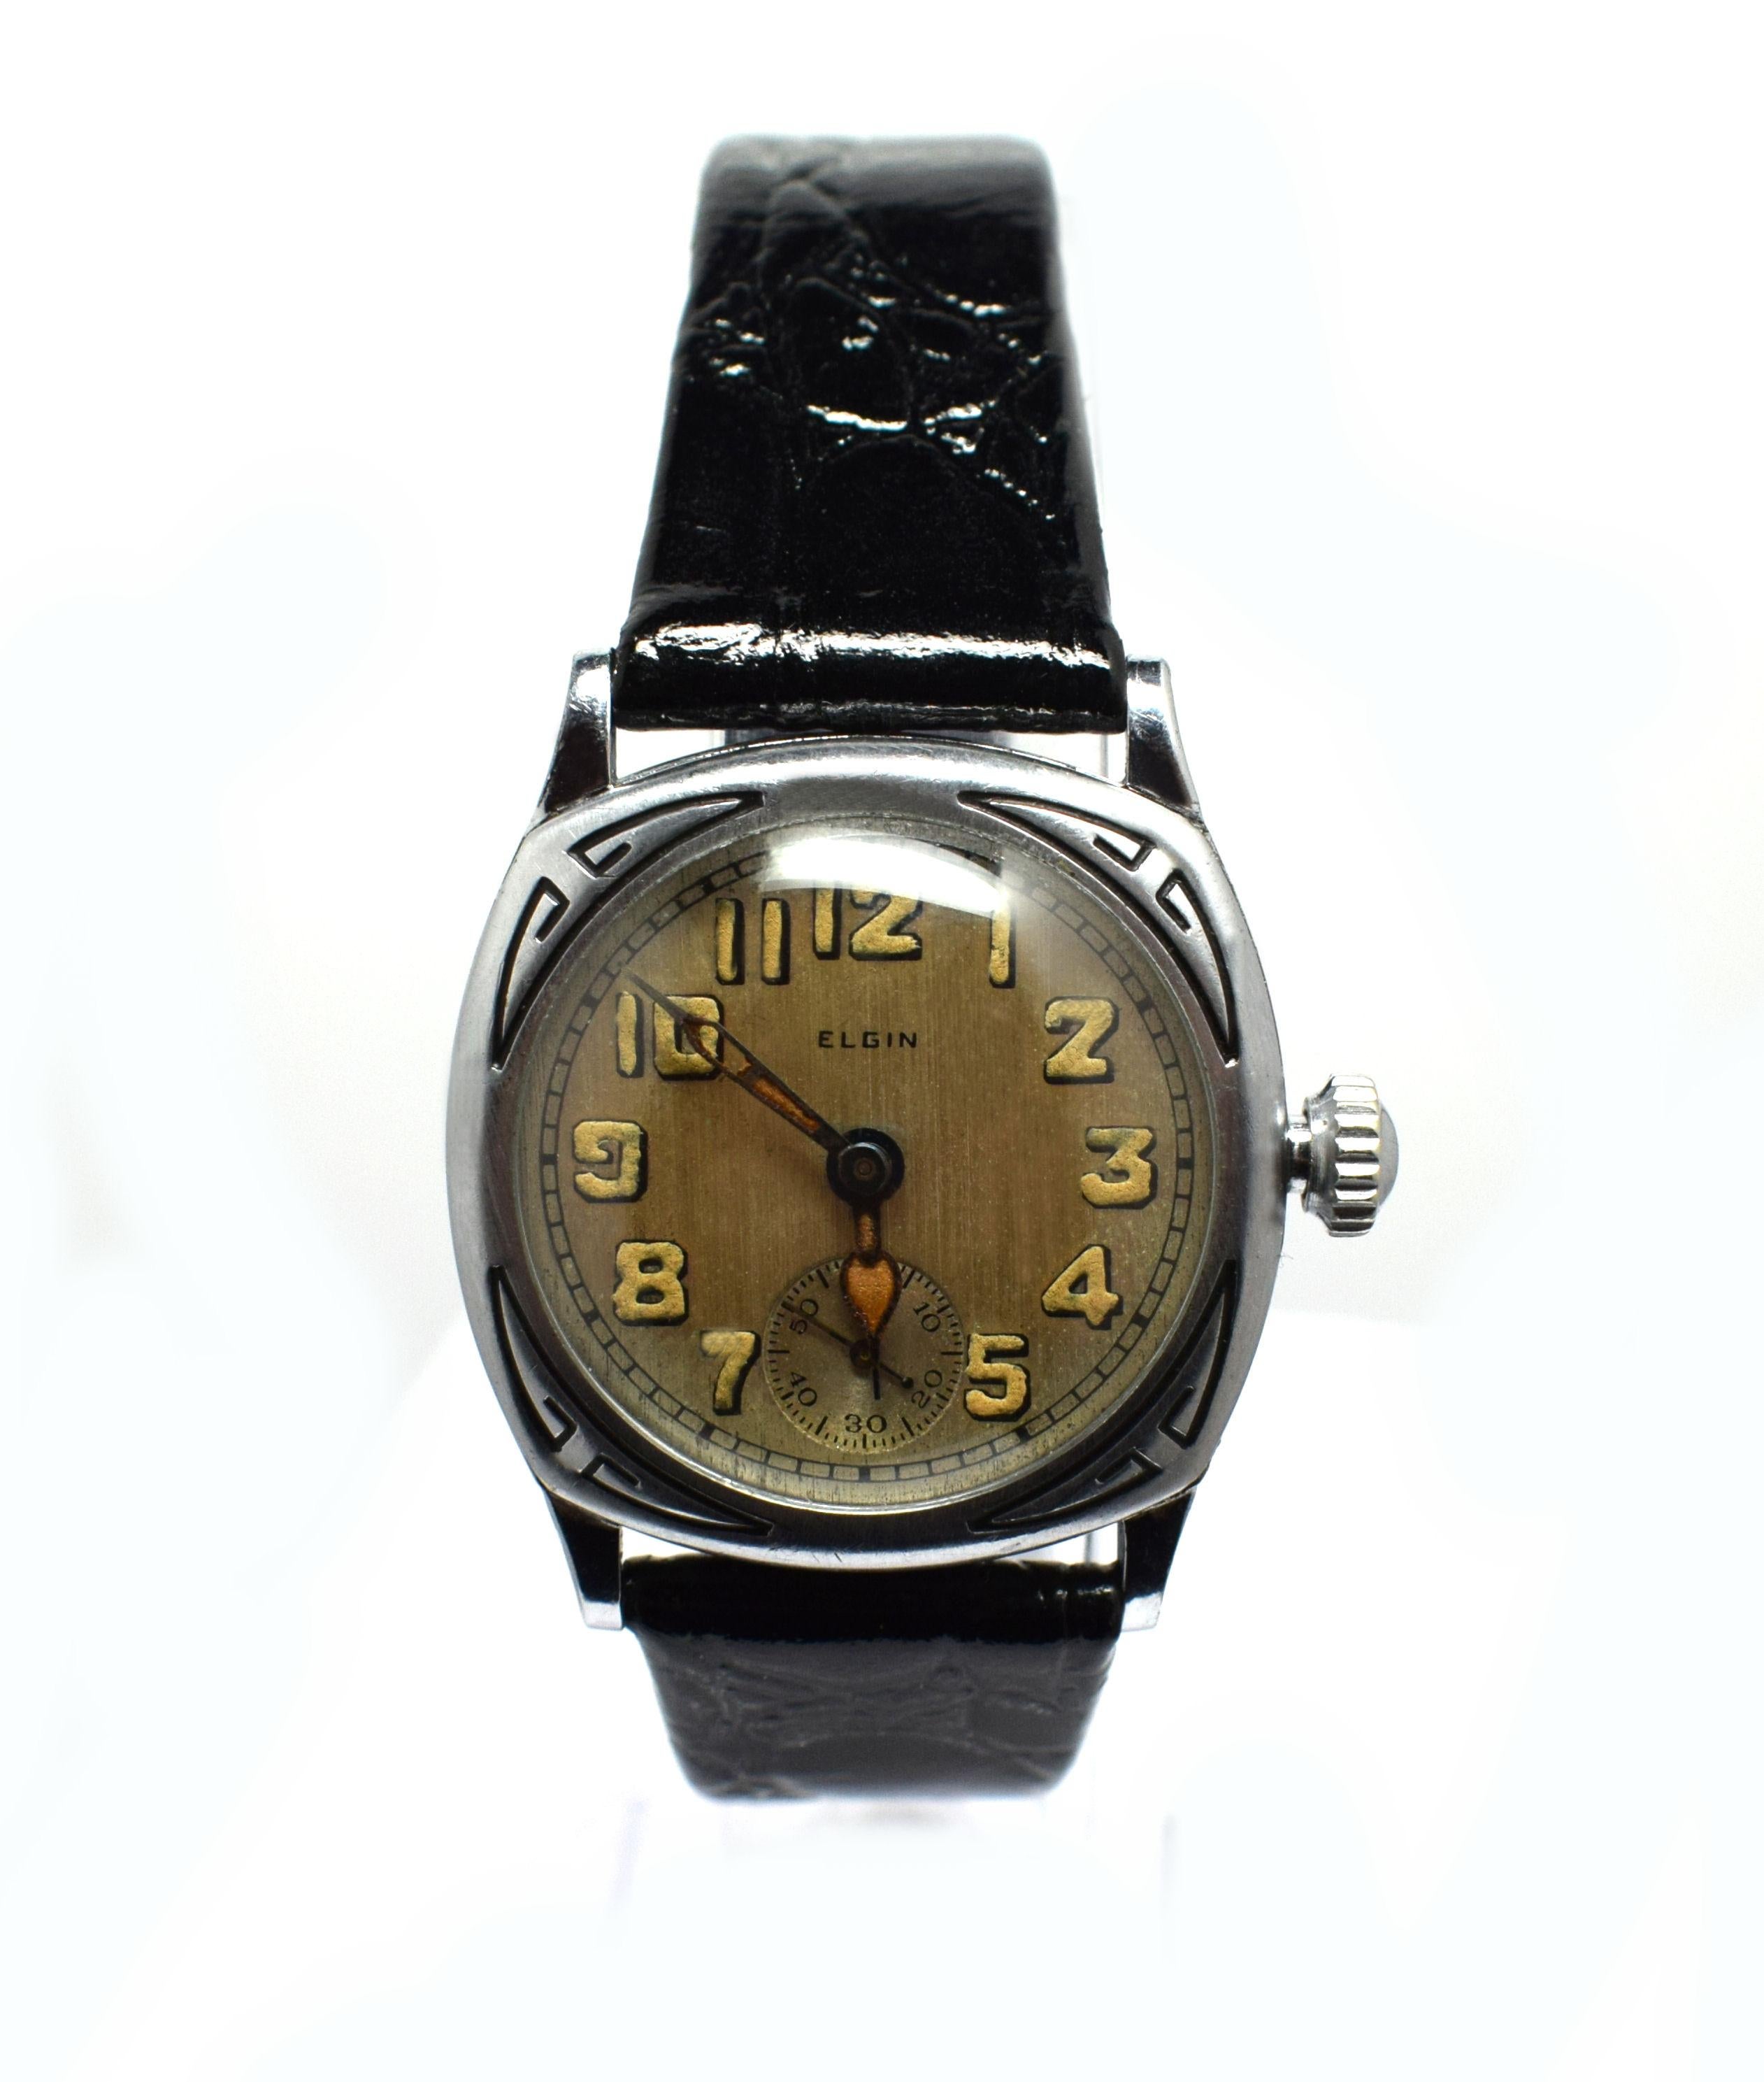 Stunning Art Deco White Gold Filled Gents Wristwatch by Elgin 1